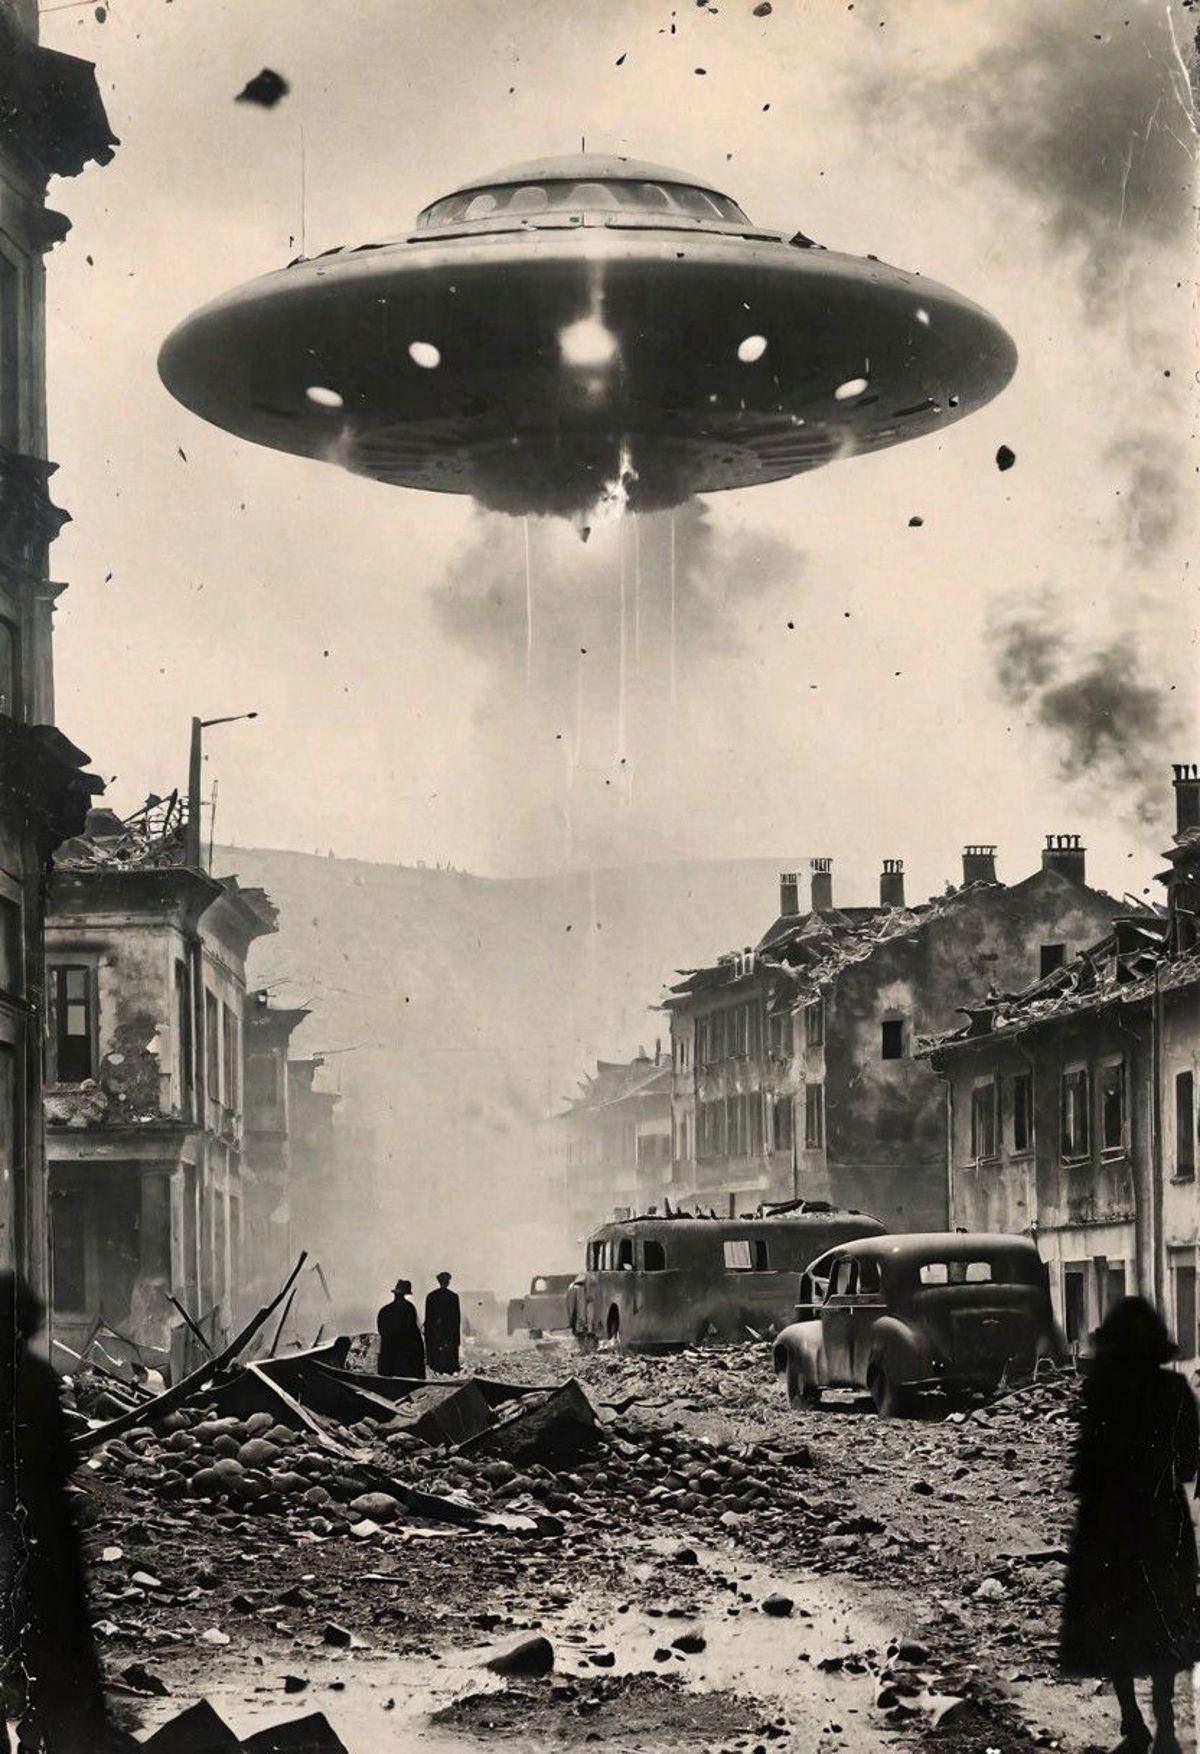 A black and white photograph of a war-torn city with an alien spacecraft flying overhead, causing destruction. People are standing in the street, observing the chaos.